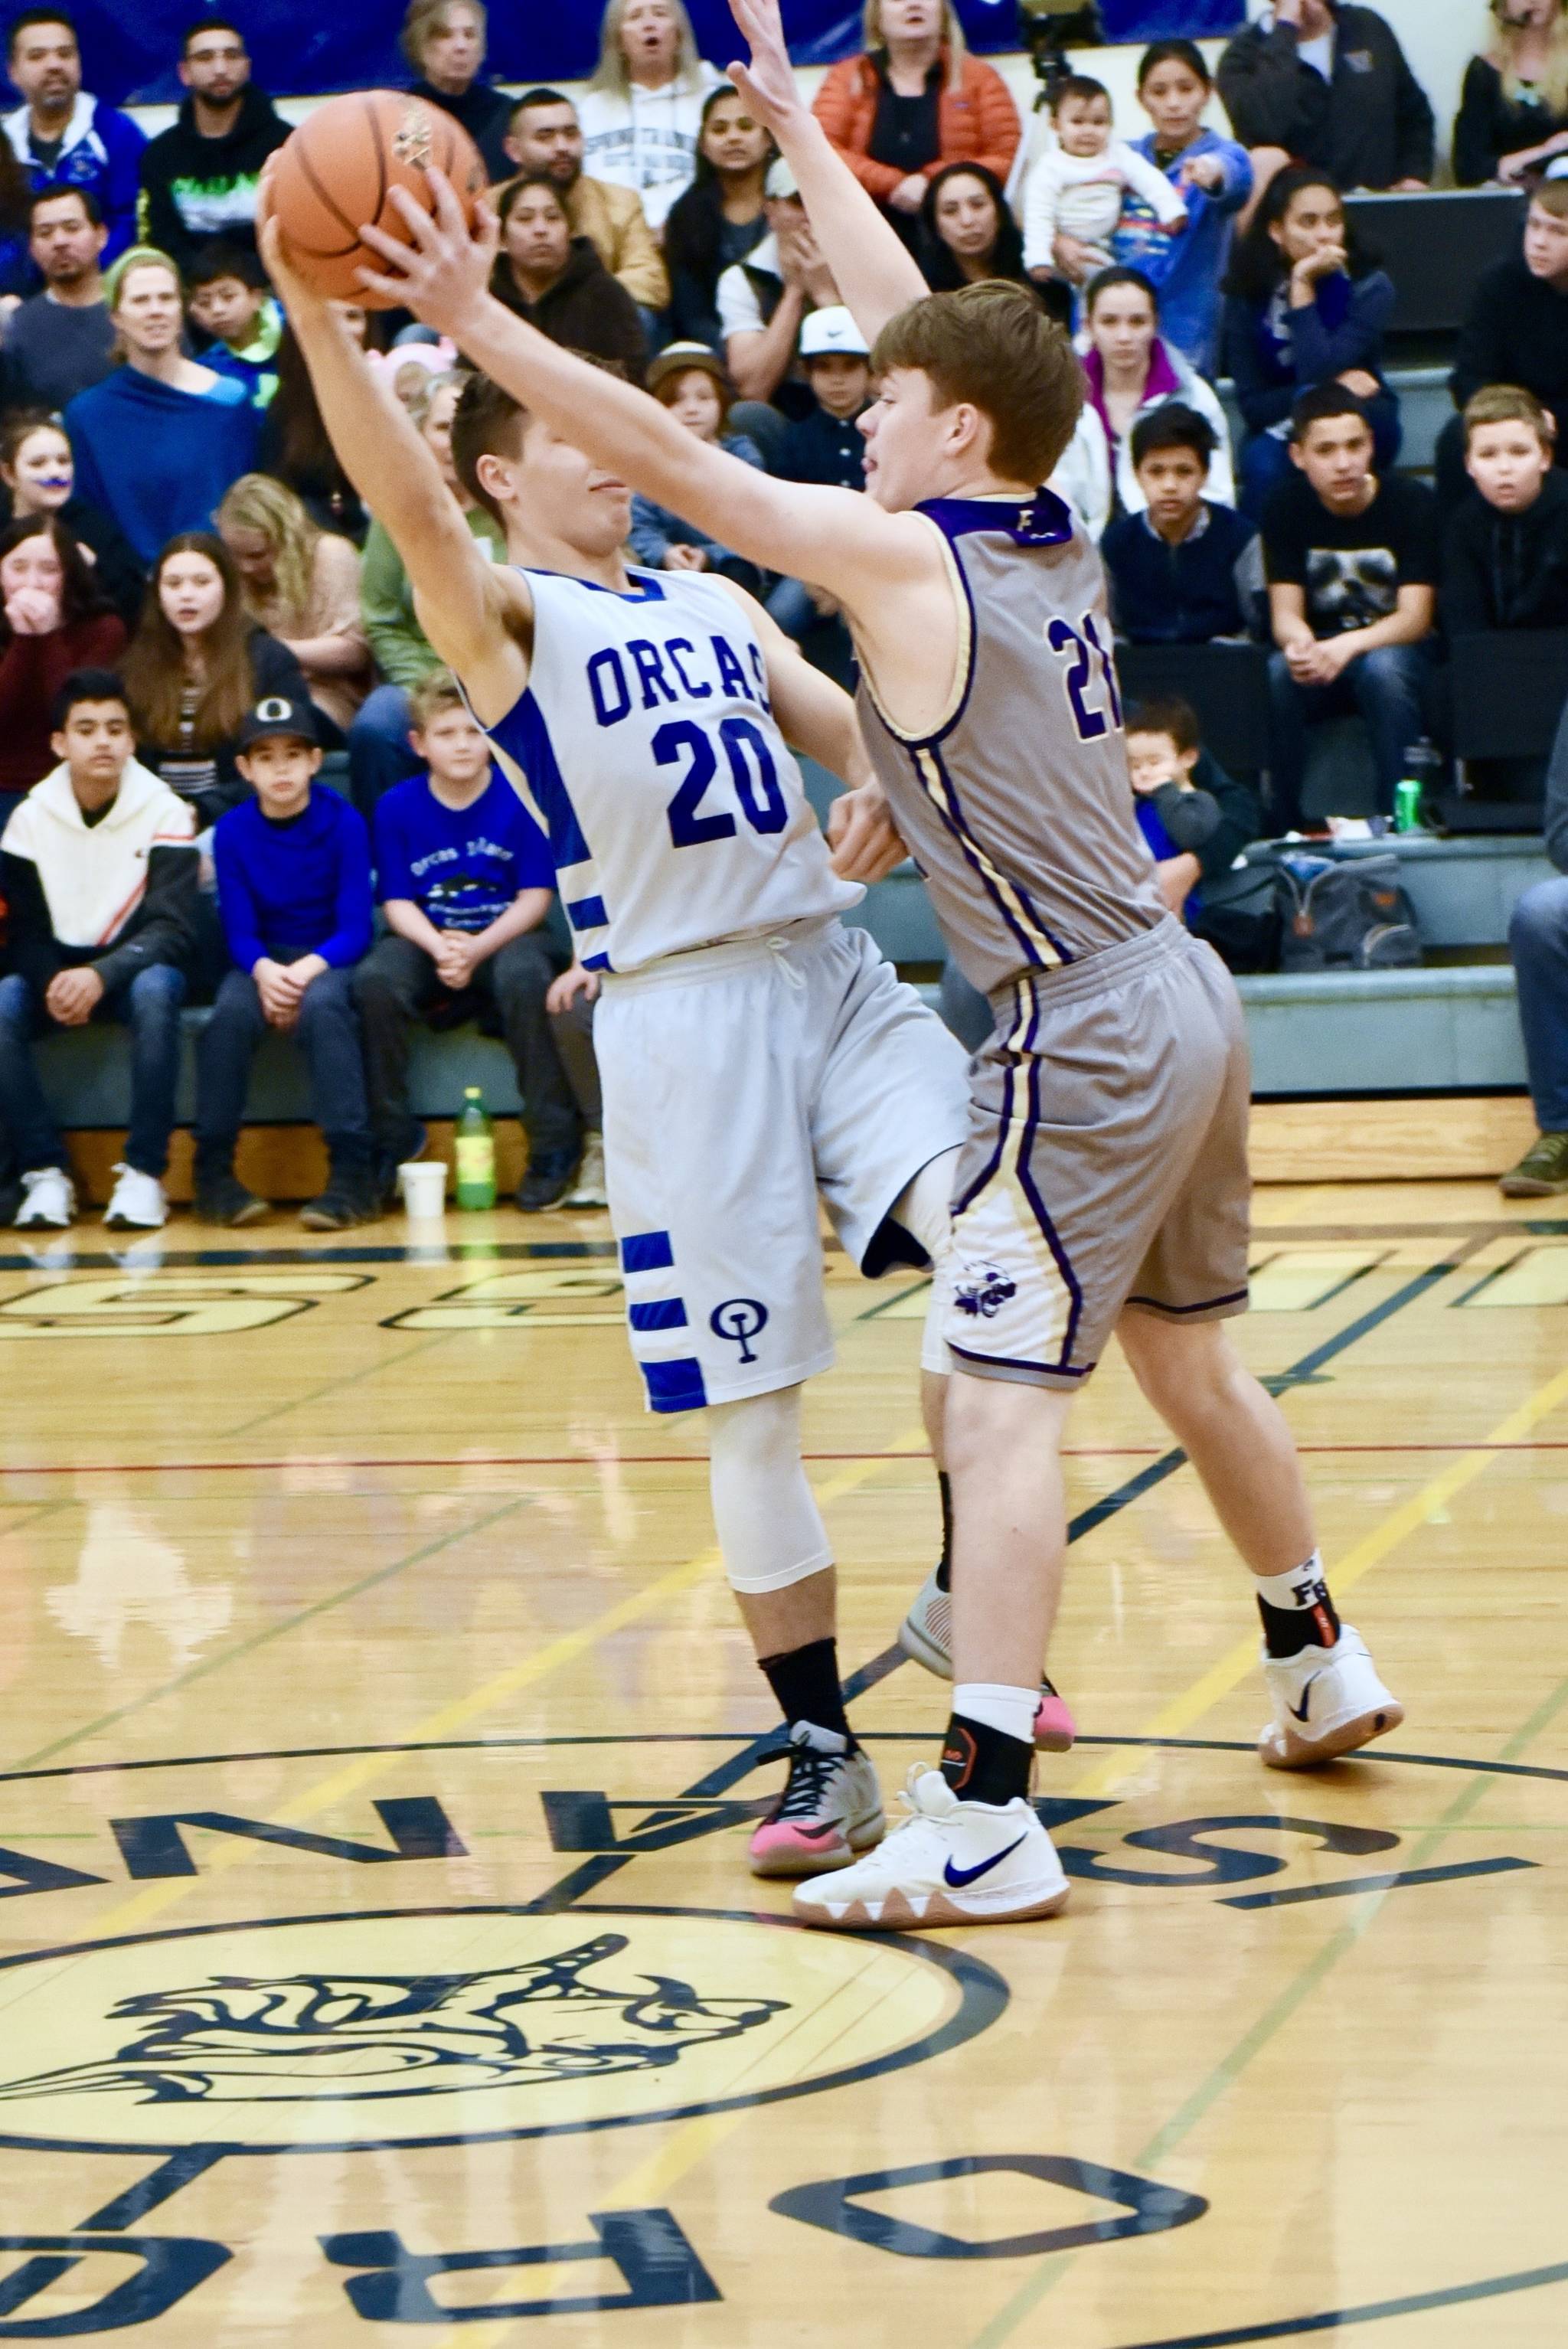 Chase Wilson applies tight defensive pressure on the Vikings.